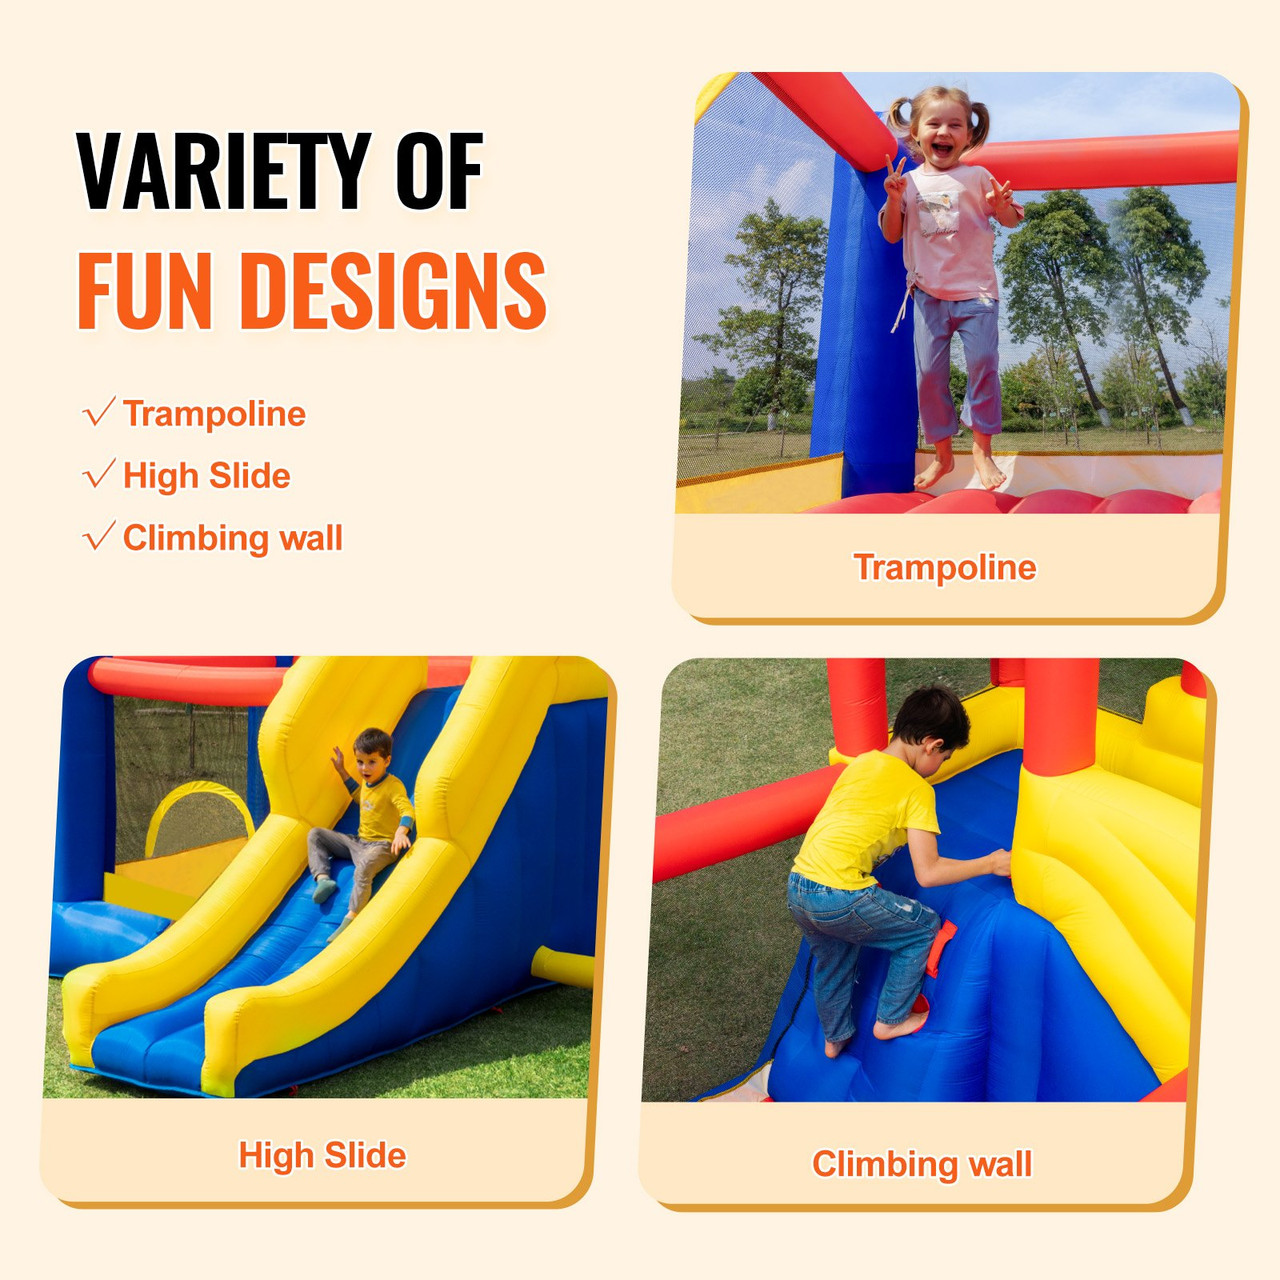 VEVOR Inflatable Bounce House, Outdoor High Quality Playhouse Trampoline, Jumping Bouncer with Blower, Slide, and Storage Bag, Family Backyard Bouncy Castle, for Kid Ages 3-8 Years, 134x102x91 inch